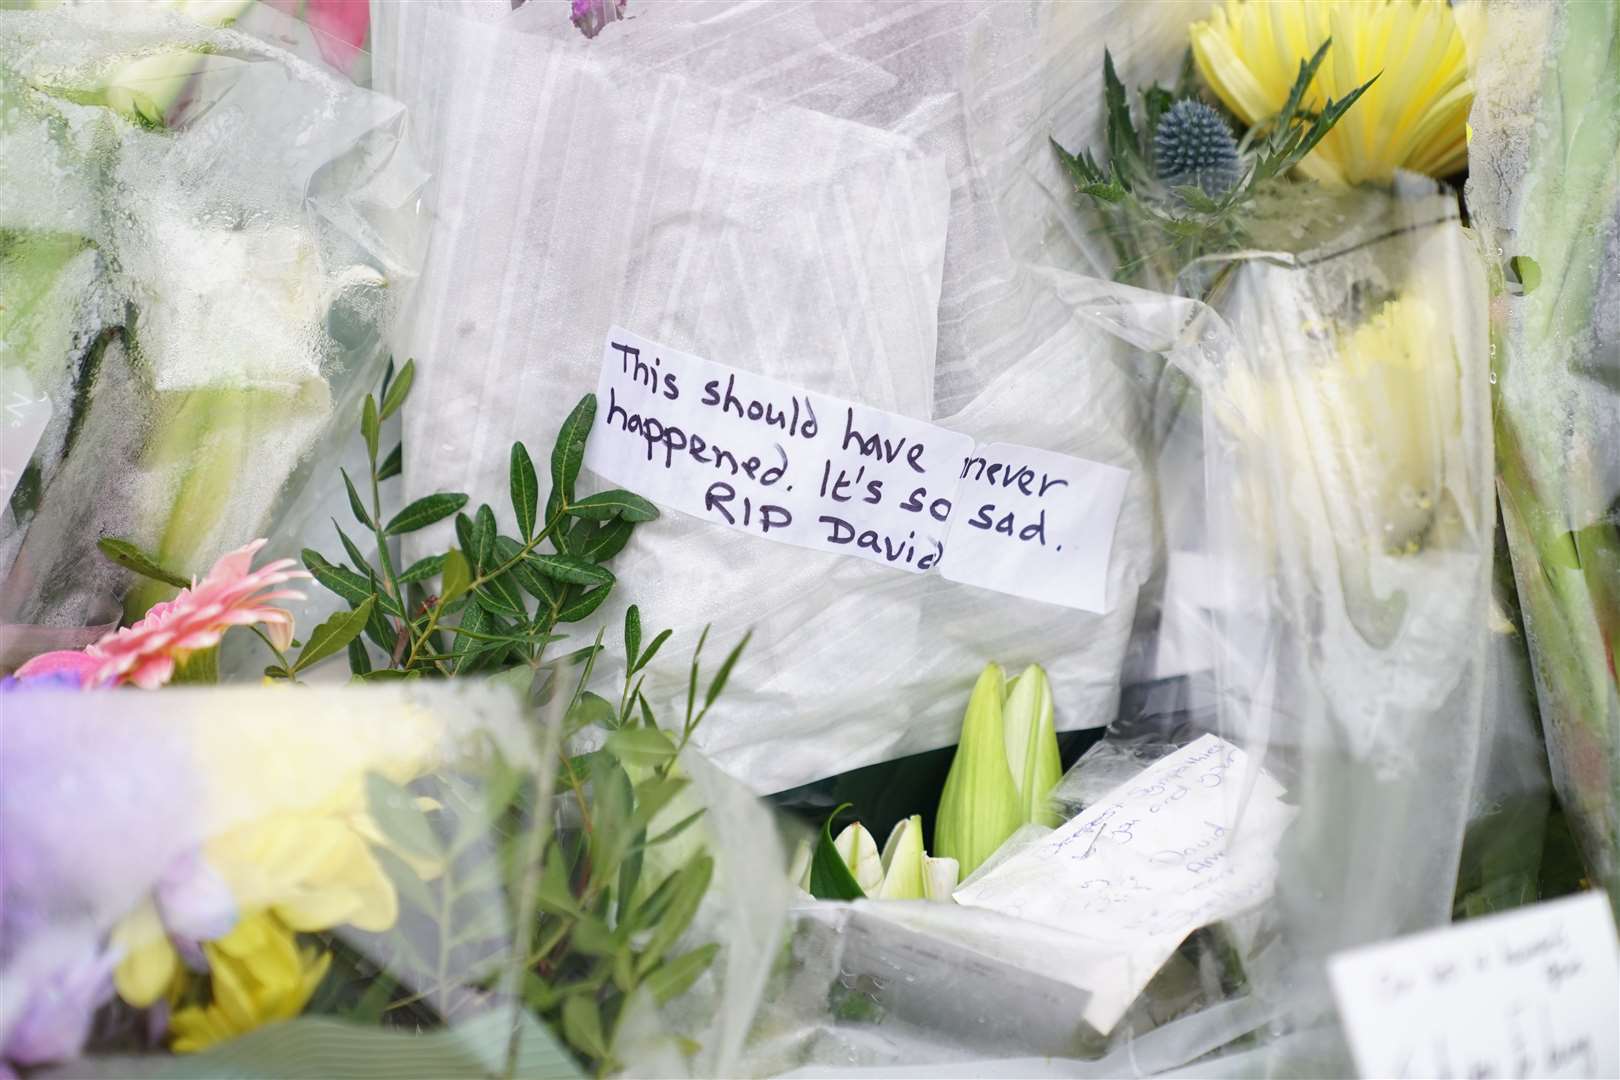 Flowers and tributes at the scene near Belfairs Methodist Church in Leigh-on-Sea (Kirsty O’Connor/PA)